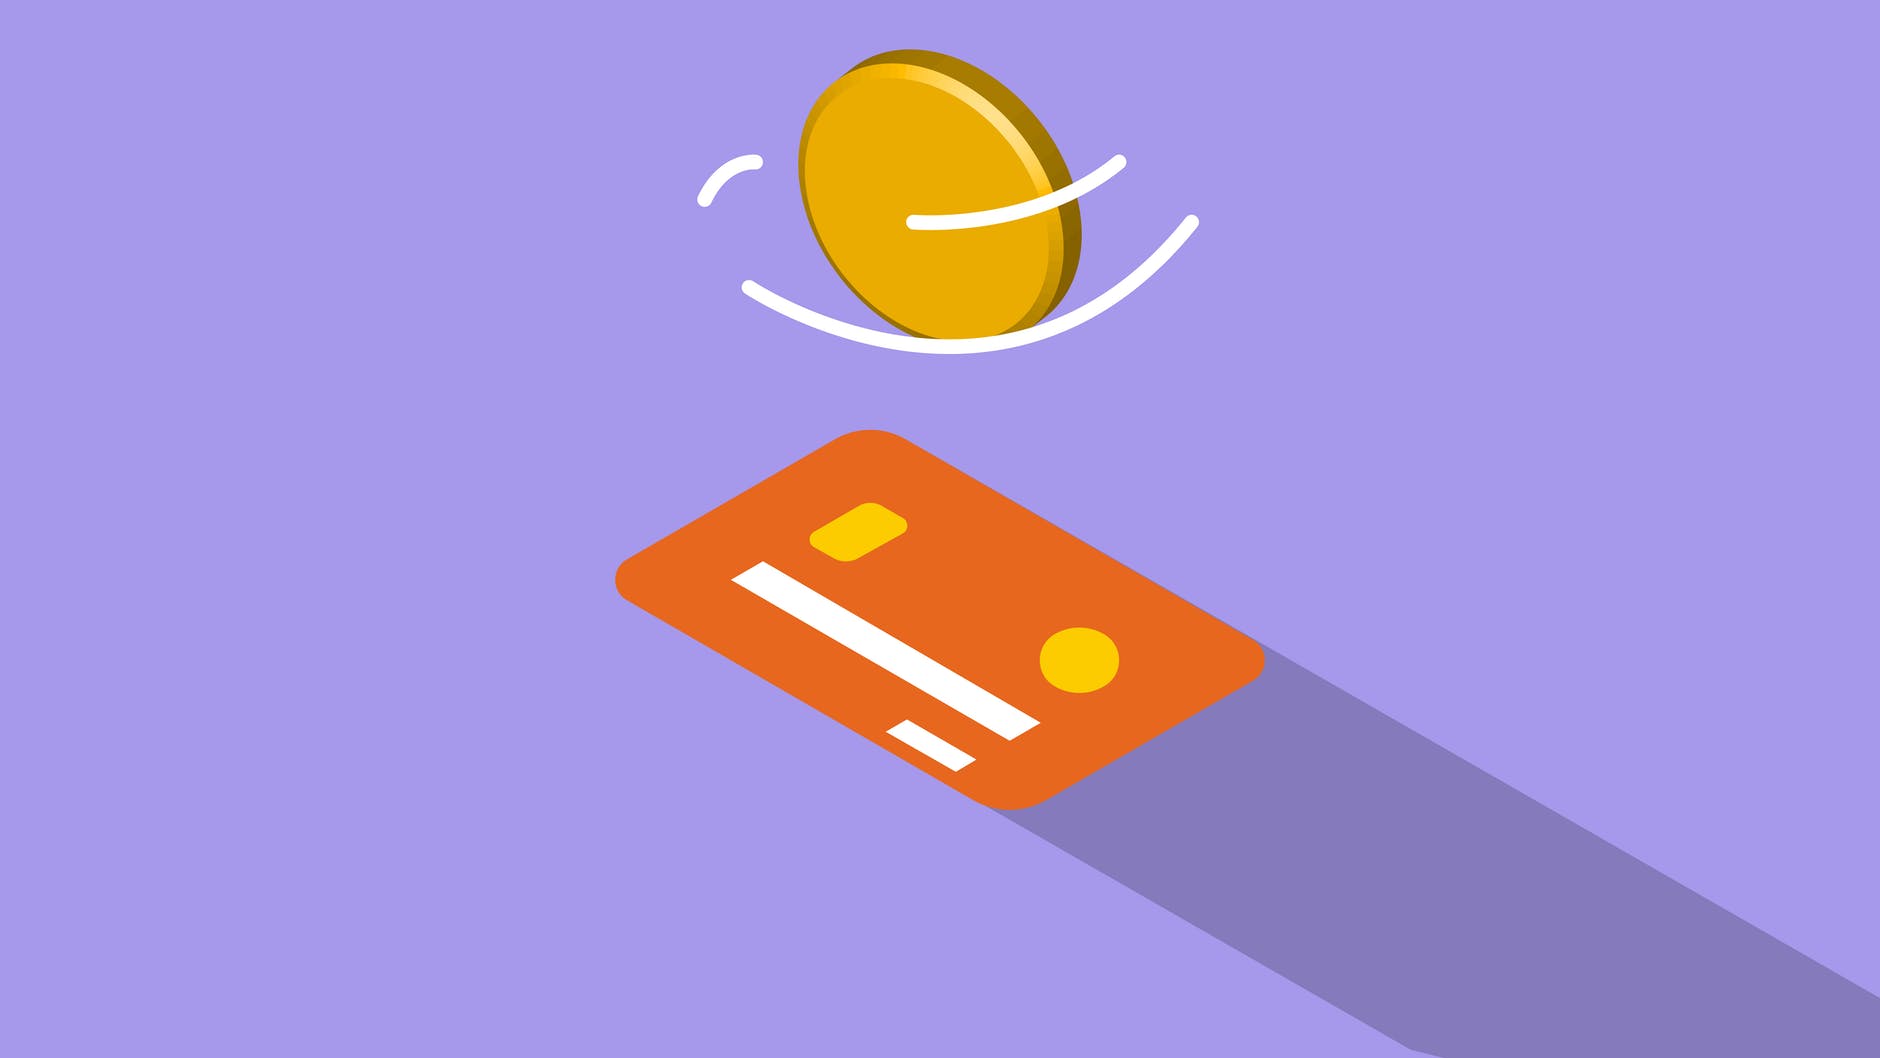 credit card and coin on violet background